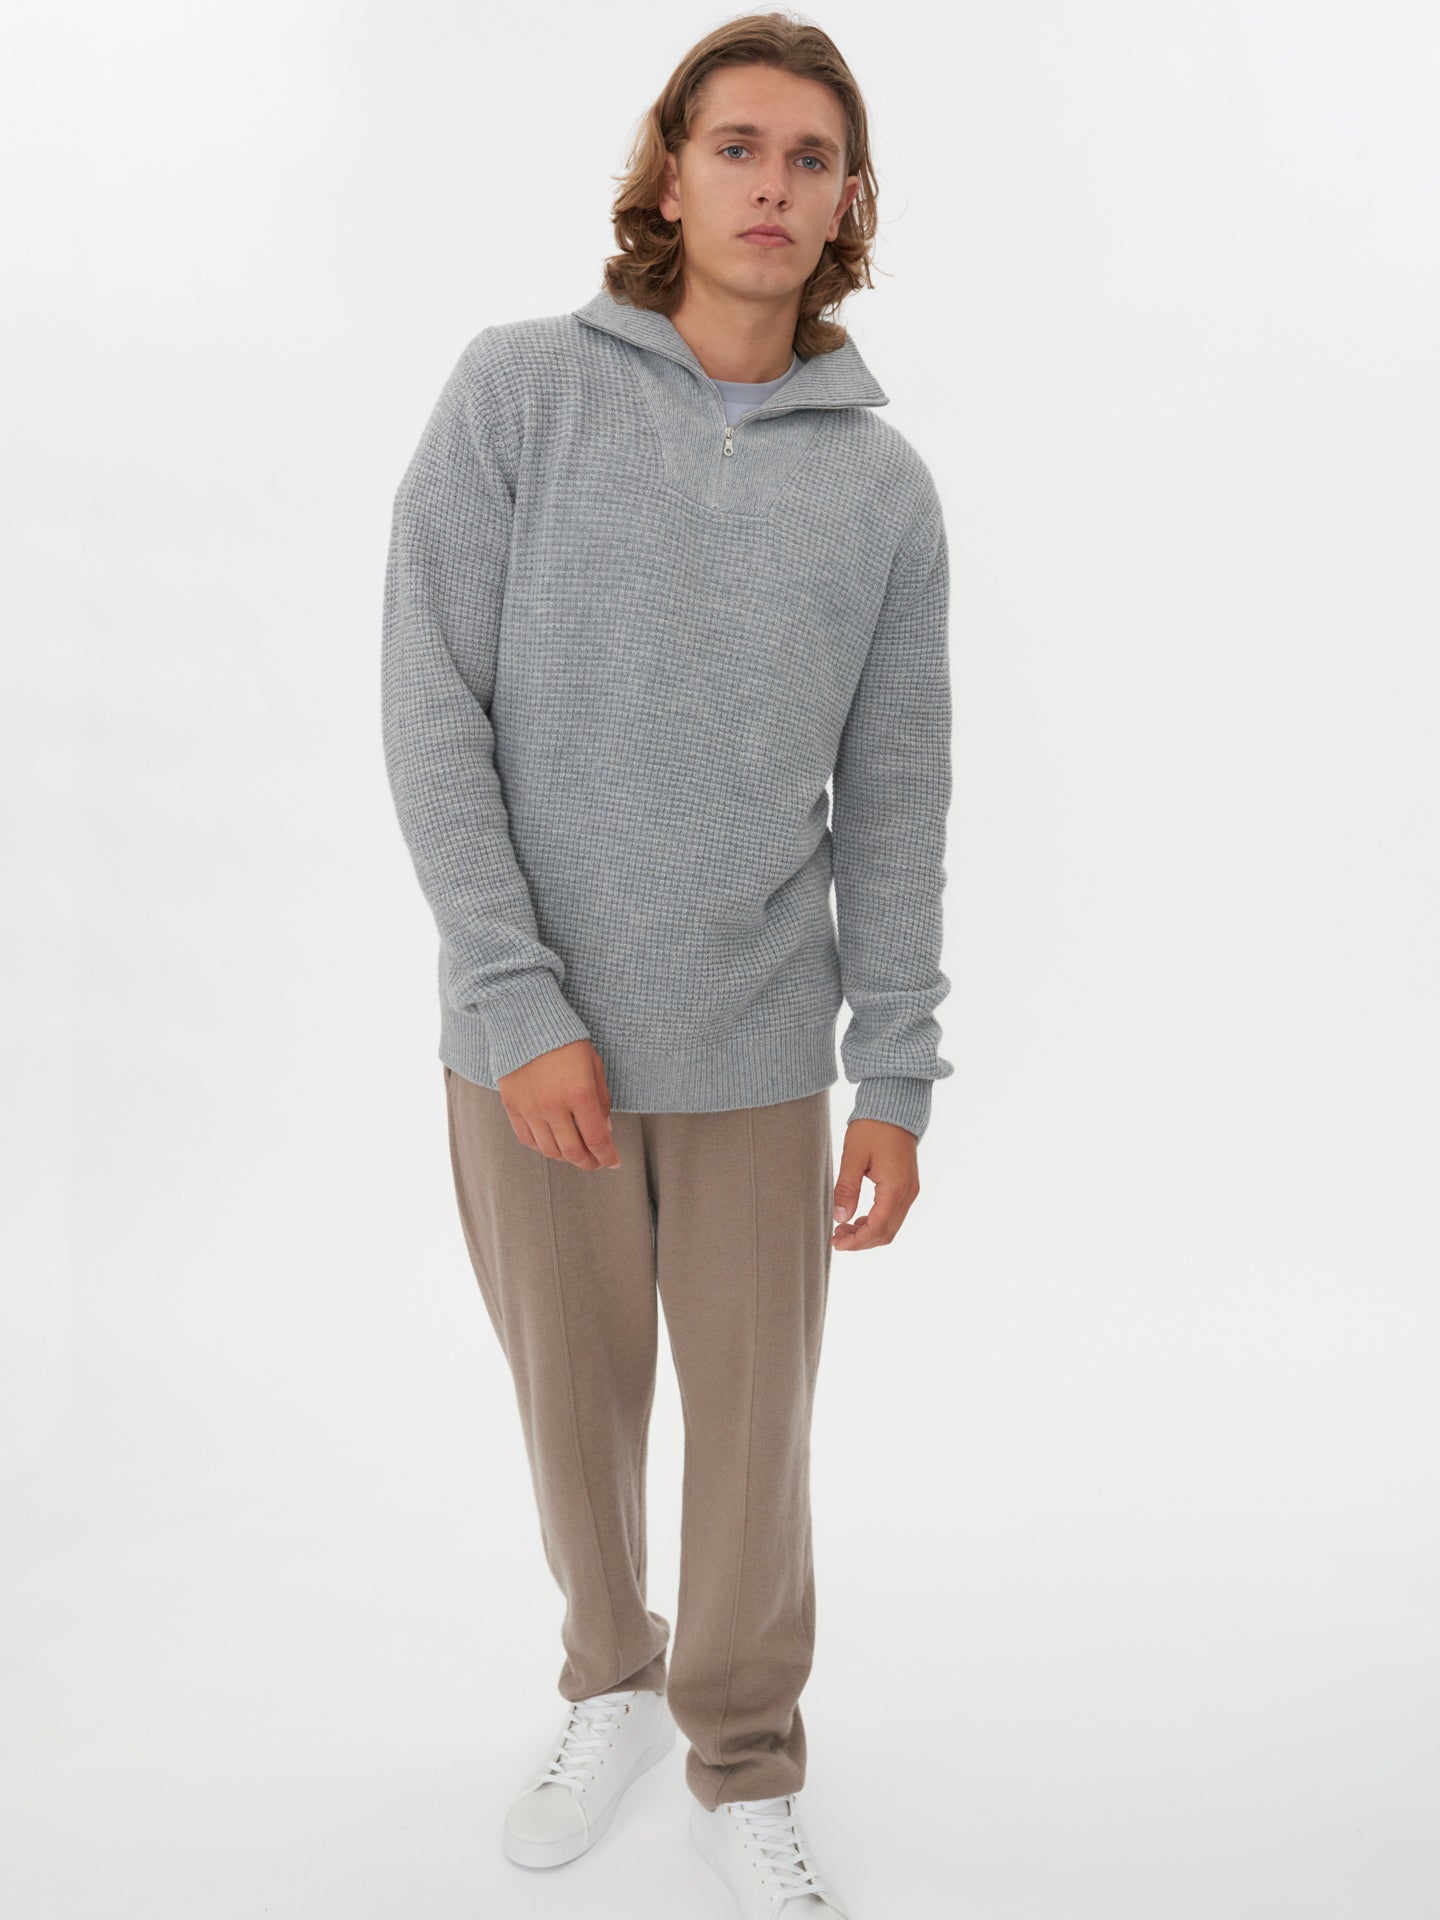 Discover Luxurious Men's Cashmere Jumpers | GOBI Cashmere